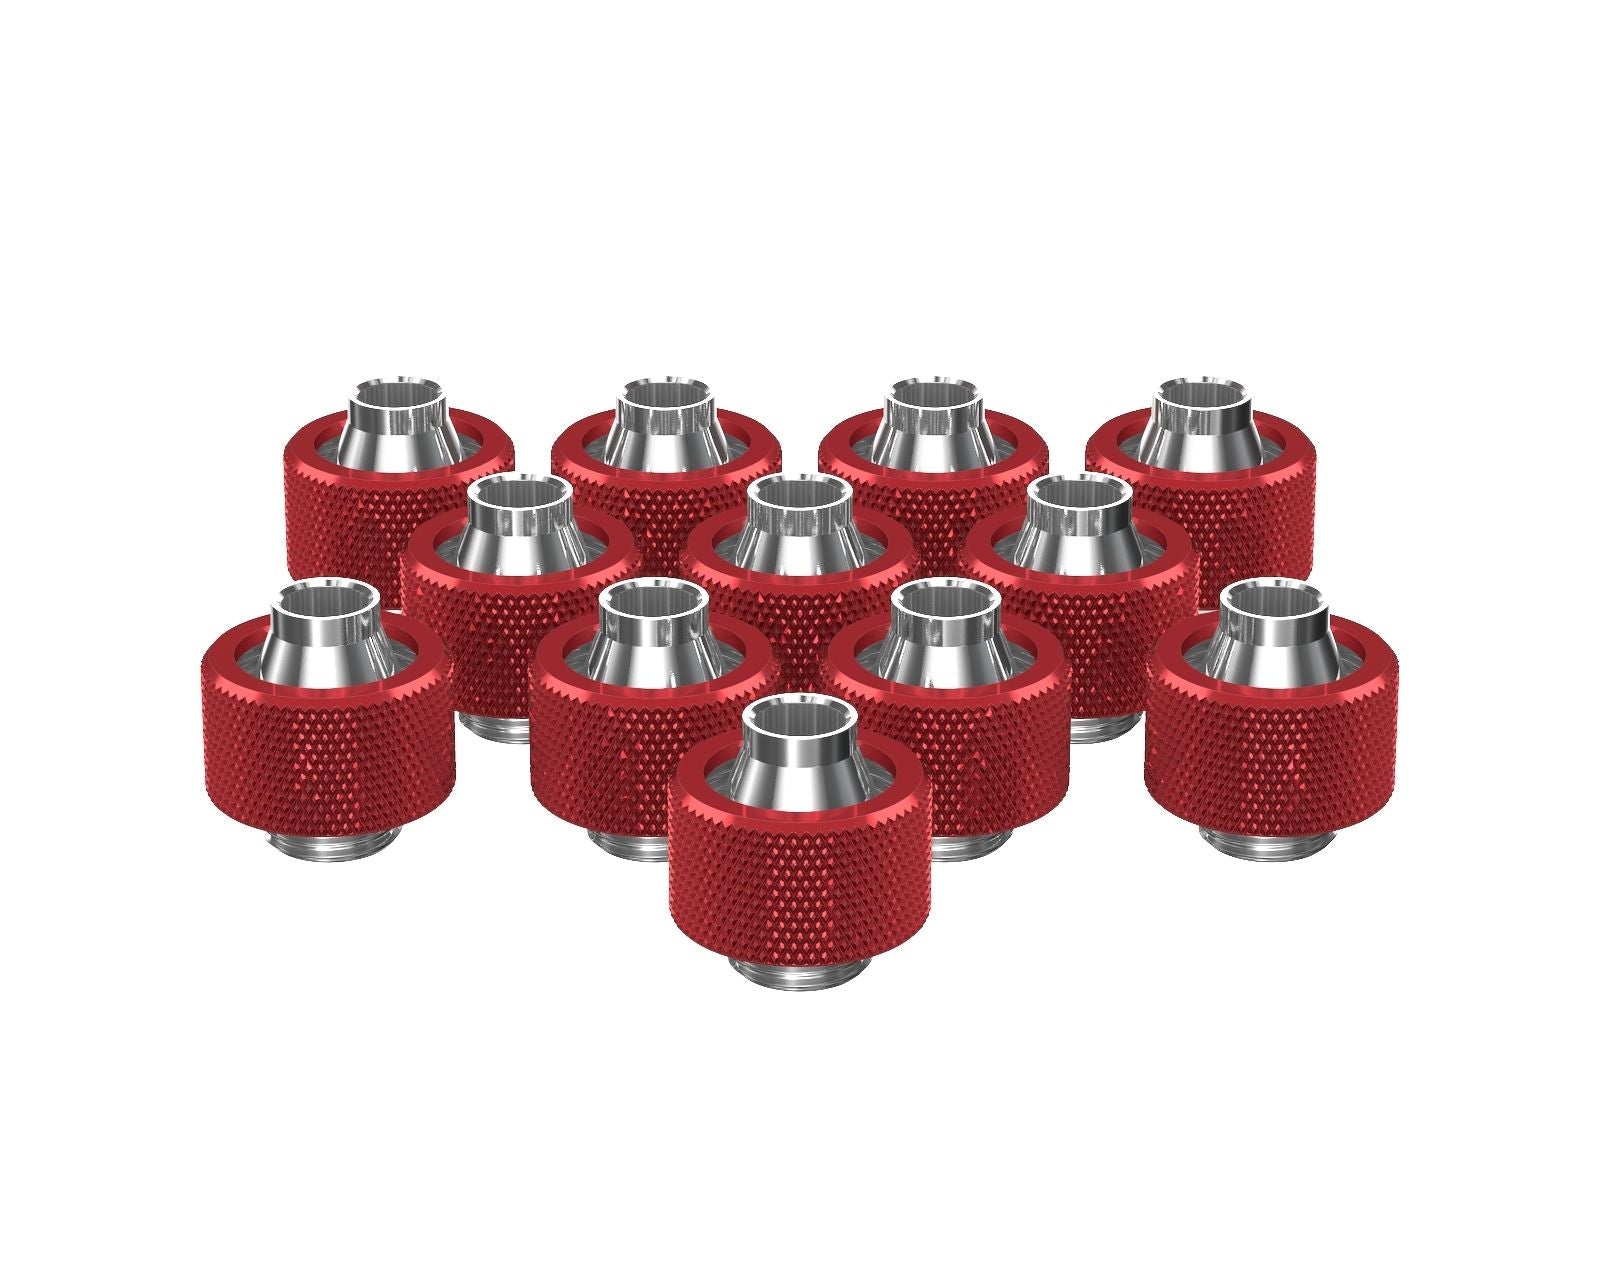 PrimoChill SecureFit SX - Premium Compression Fitting For 7/16in ID x 5/8in OD Flexible Tubing 12 Pack (F-SFSX758-12) - Available in 20+ Colors, Custom Watercooling Loop Ready - Candy Red